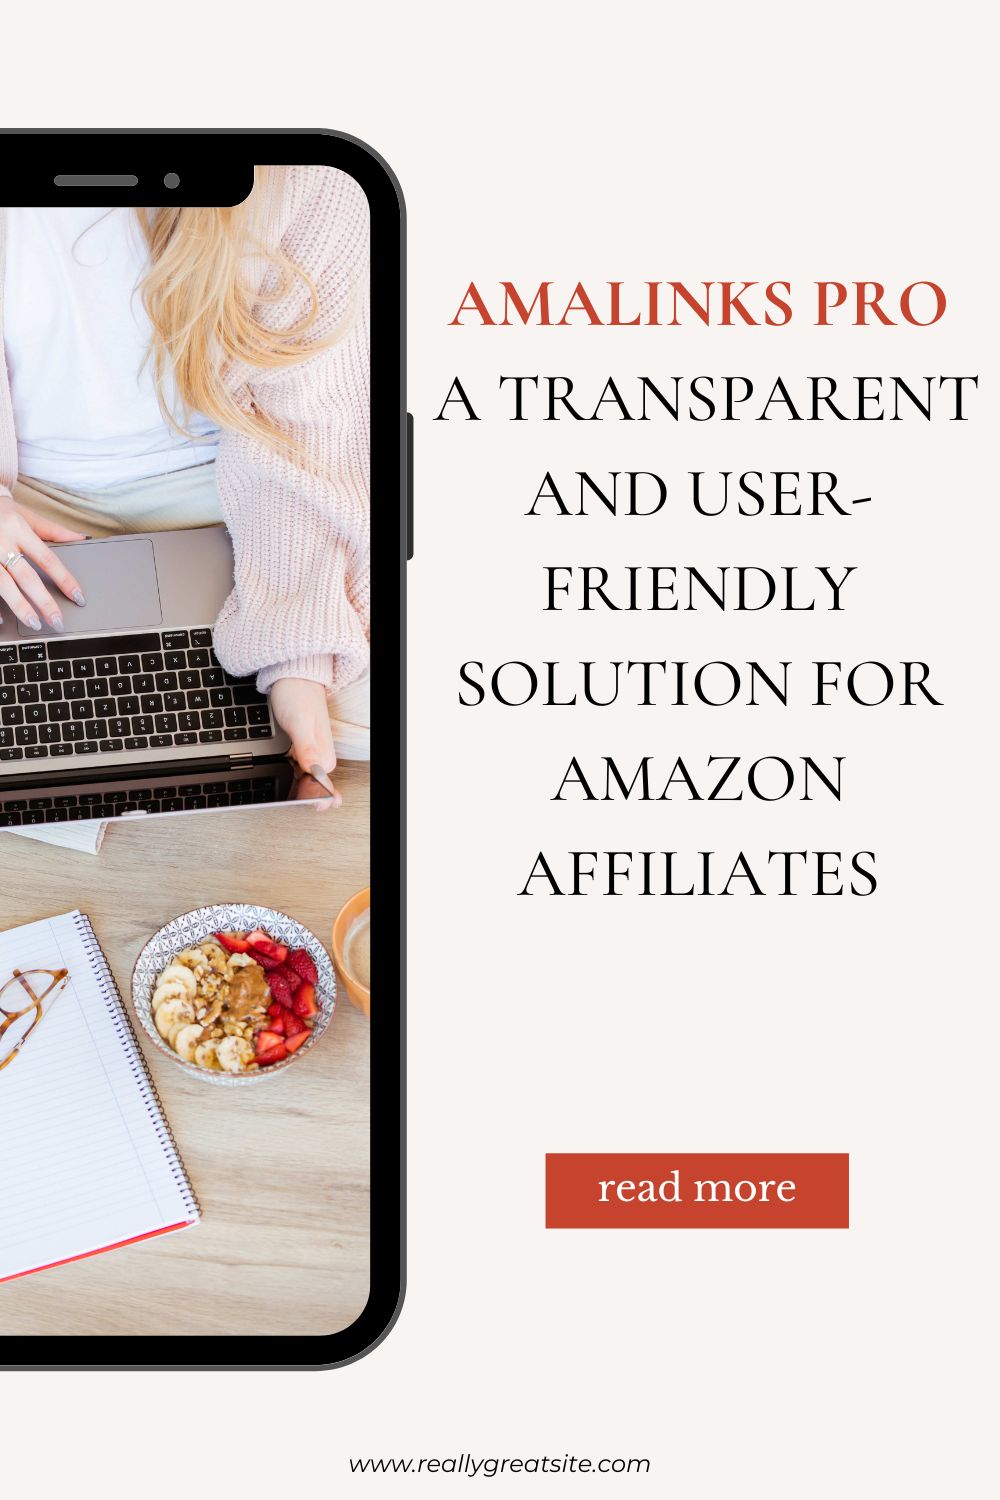 AmaLinks-Pro-A-Transparent-and-User-Friendly-Solution-For-Amazon-Affiliates